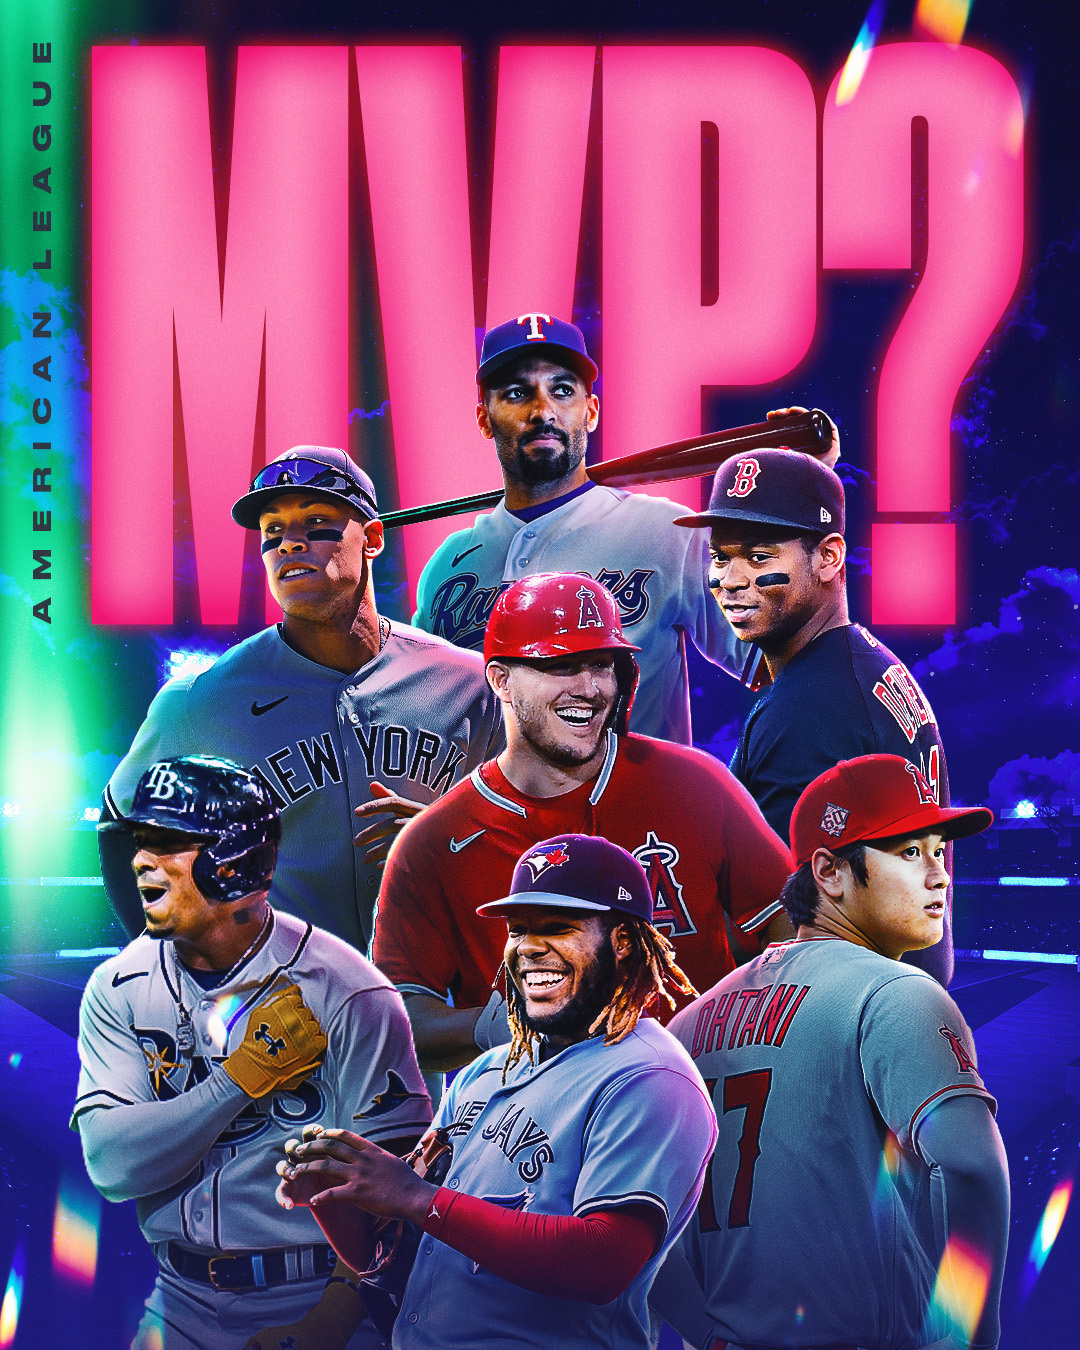 MLB on Twitter "Opening Week is here! Is the 2022 AL MVP on this